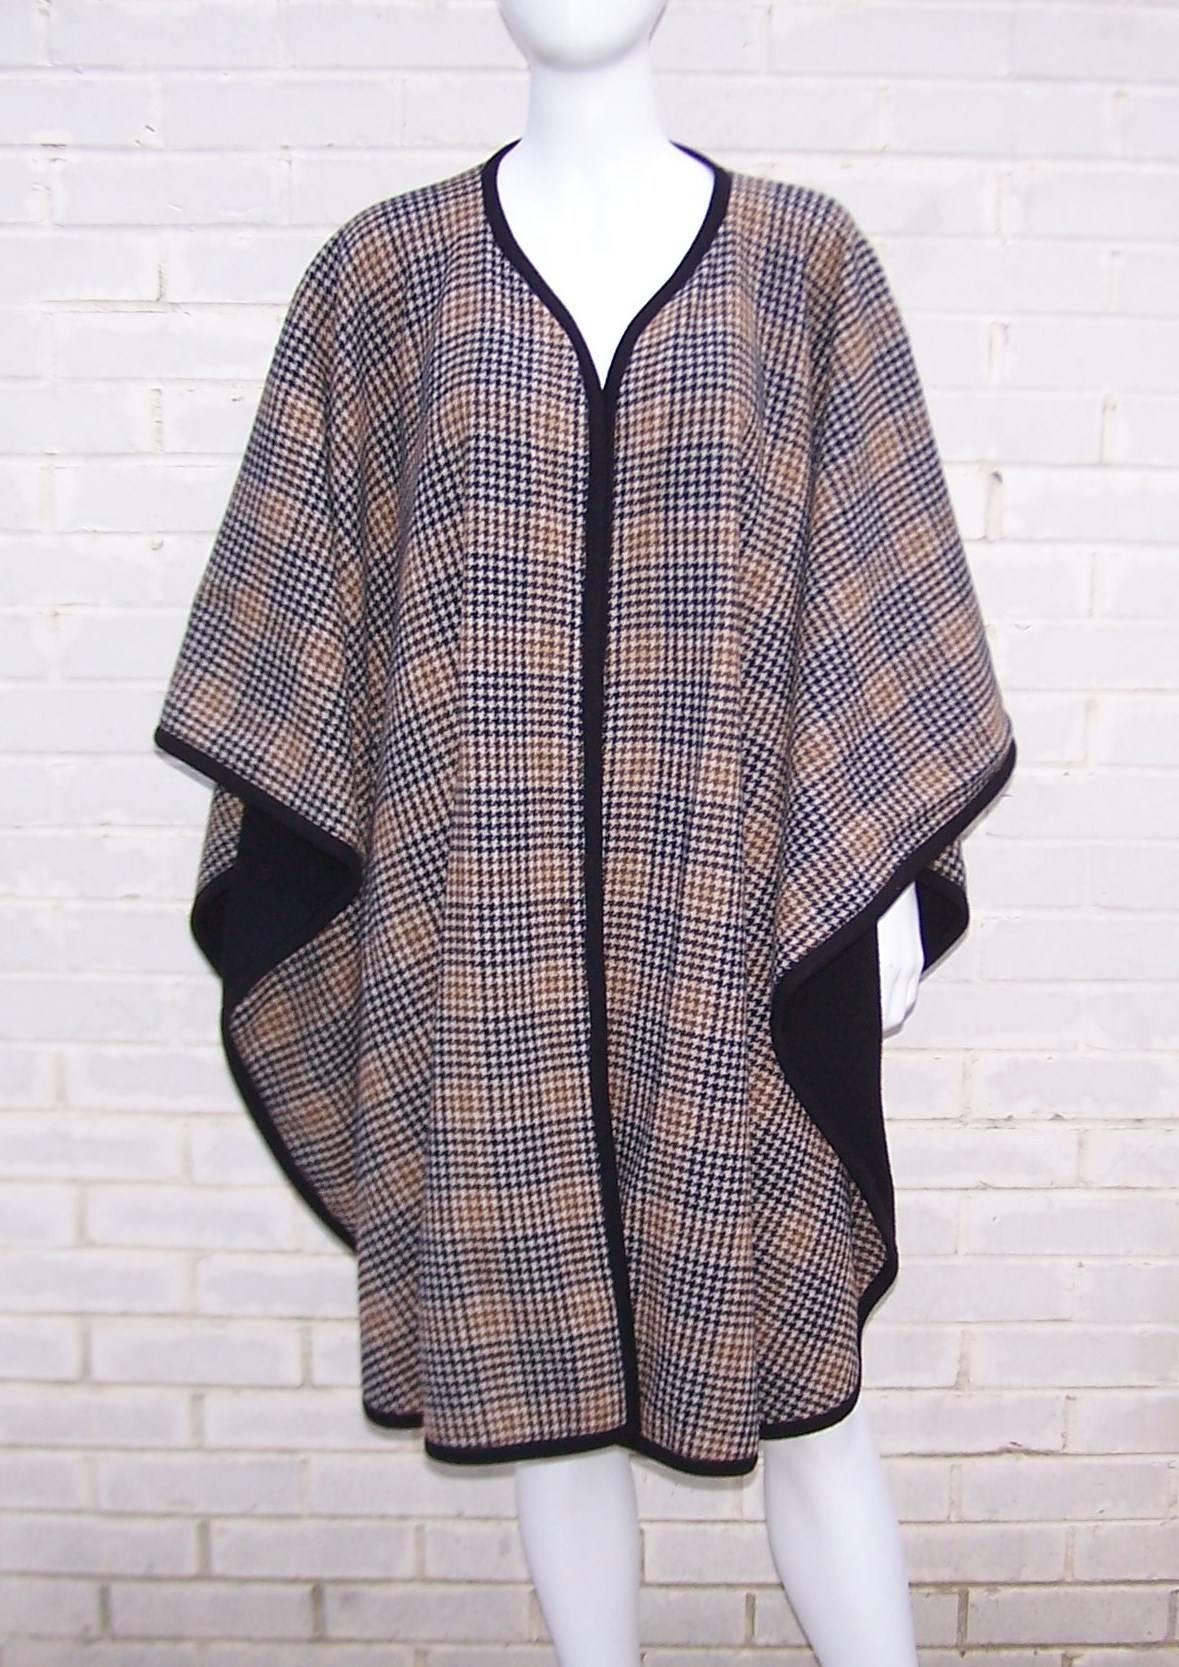 This wool knit cape is warm and cozy with all the classic charm of a Burberry style brown and black houndstooth pattern.  The versatile wrap is reversible and can be worn as solid black with just a hint of the houndstooth peeping through like a